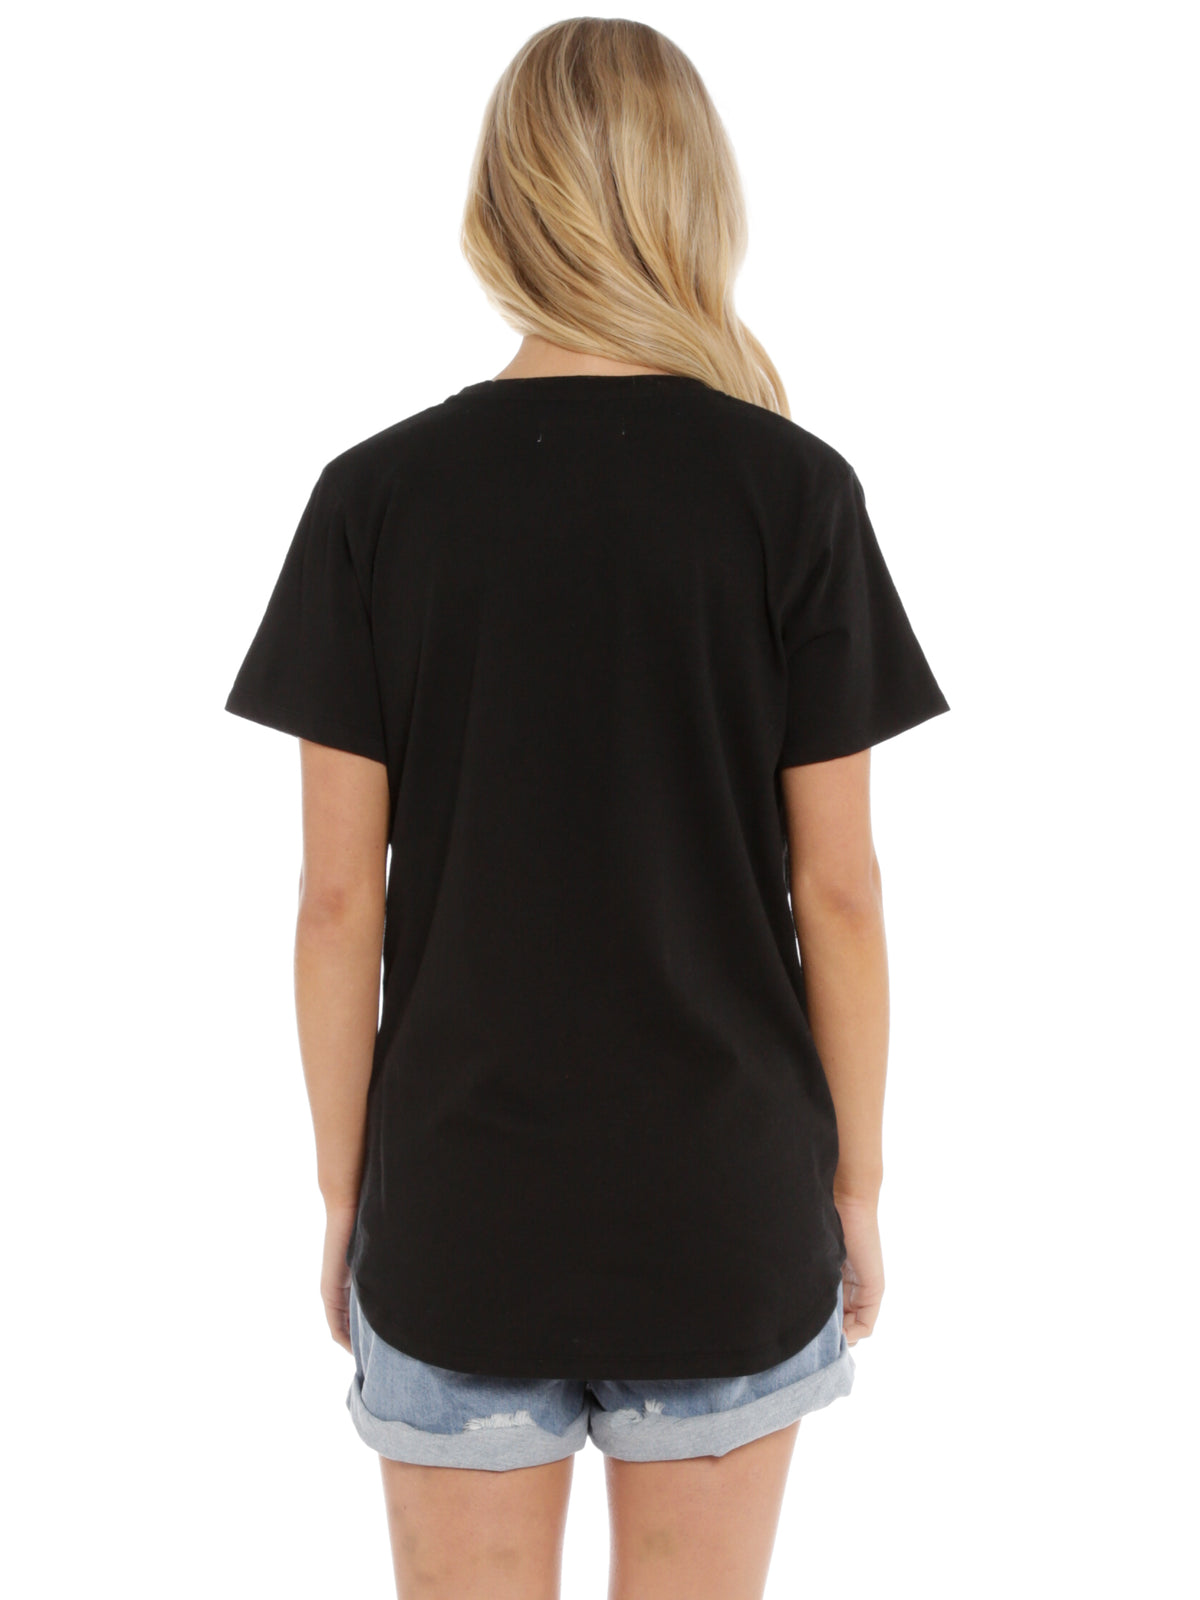 Everyday T-Shirt in Black